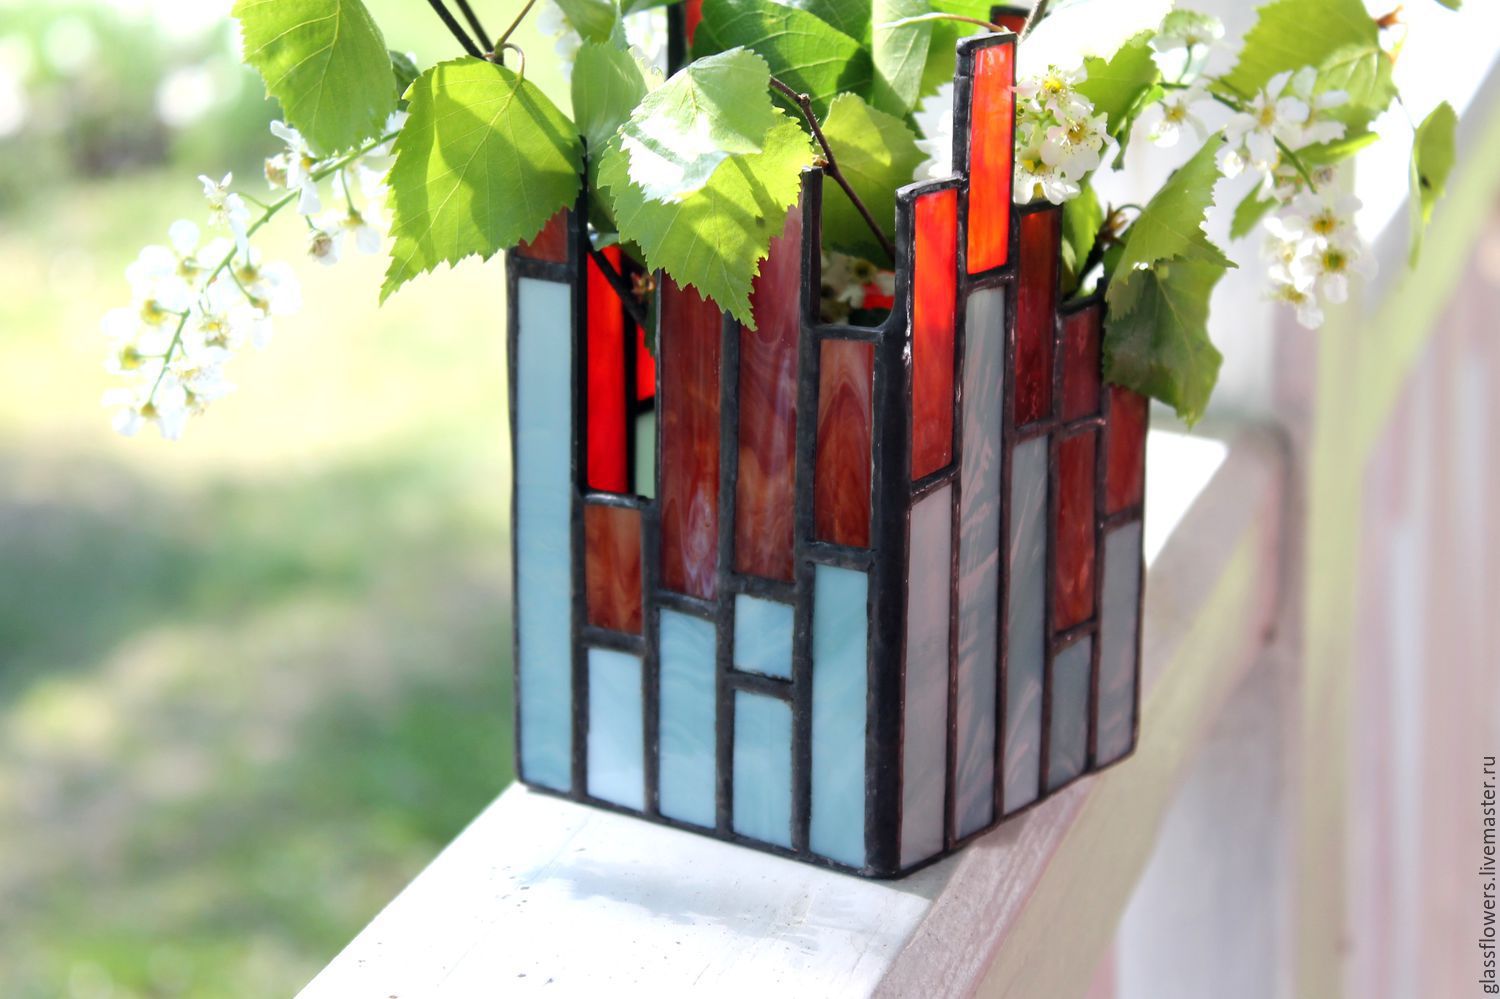 housewarming gift, wedding gift, giving, gift, candle holder glass, buy a souvenir glass, interior decoration, red candle holder, blue candle holder, stained glass gifts, stained glass
